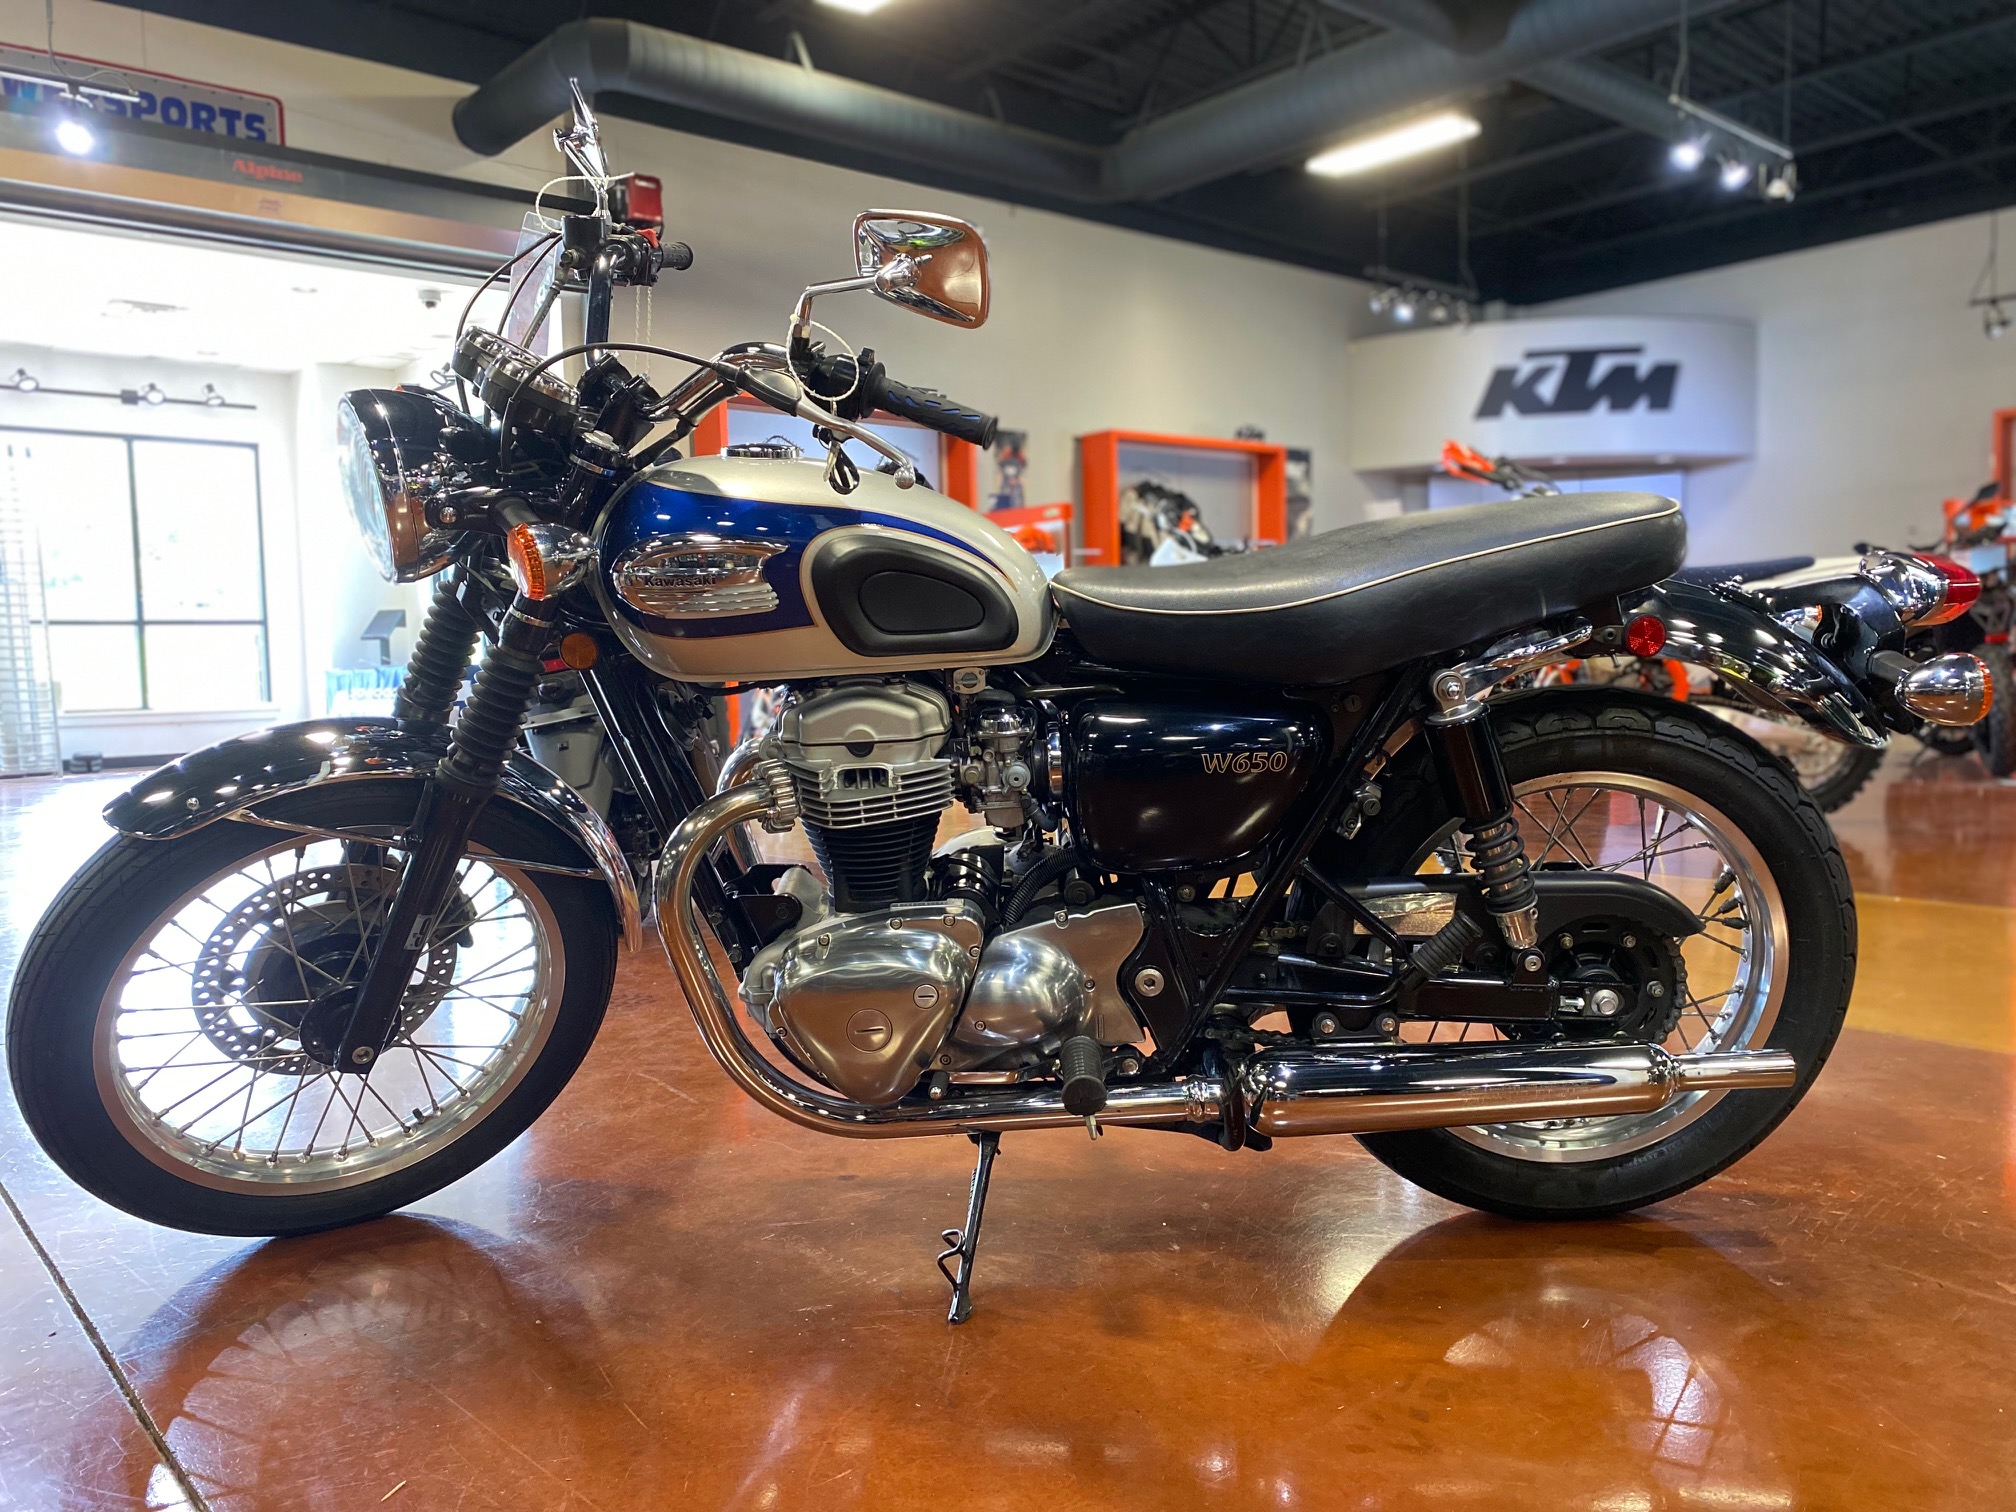 Pre-Owned 2000 KAWASAKI W650 For Sale